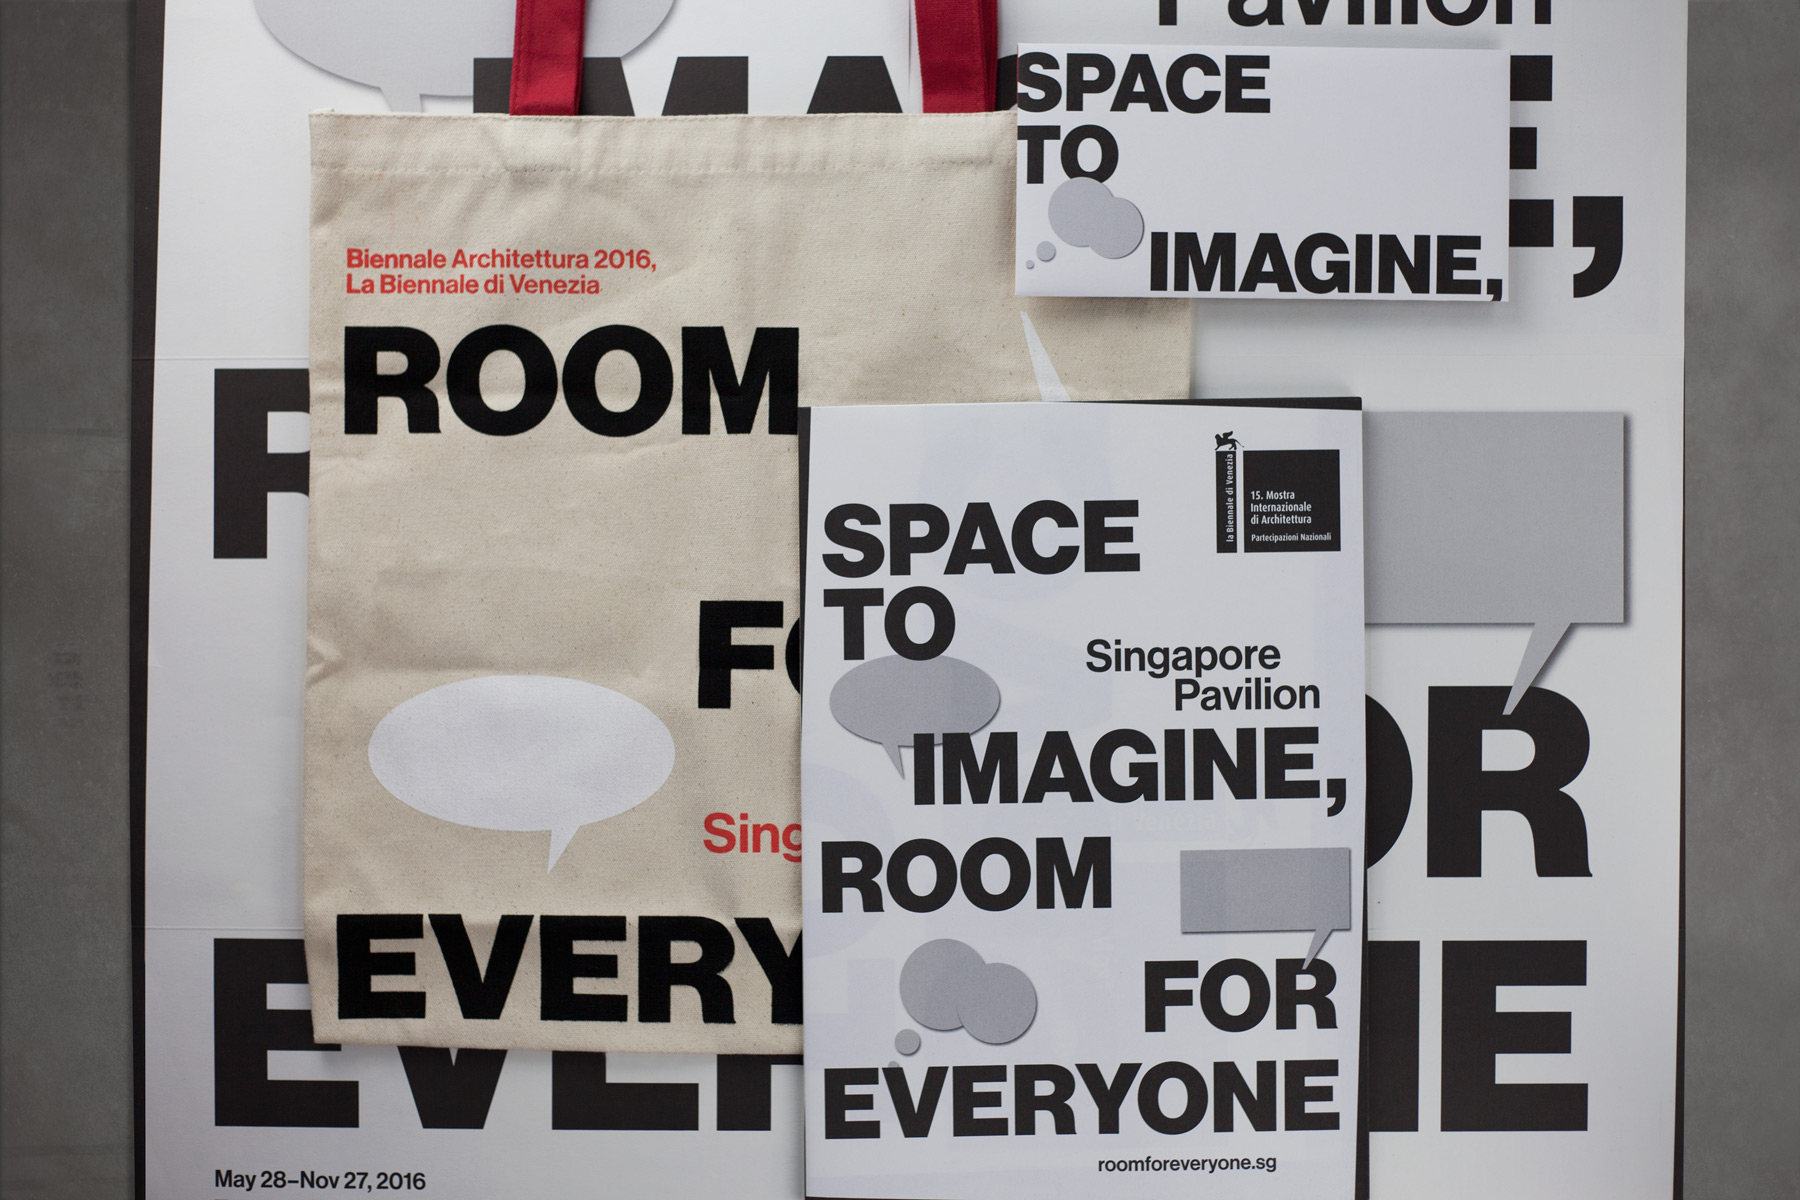 Space to Imagine, Room for Everyone - branding, publication and website, Image courtesy of Do Not Design